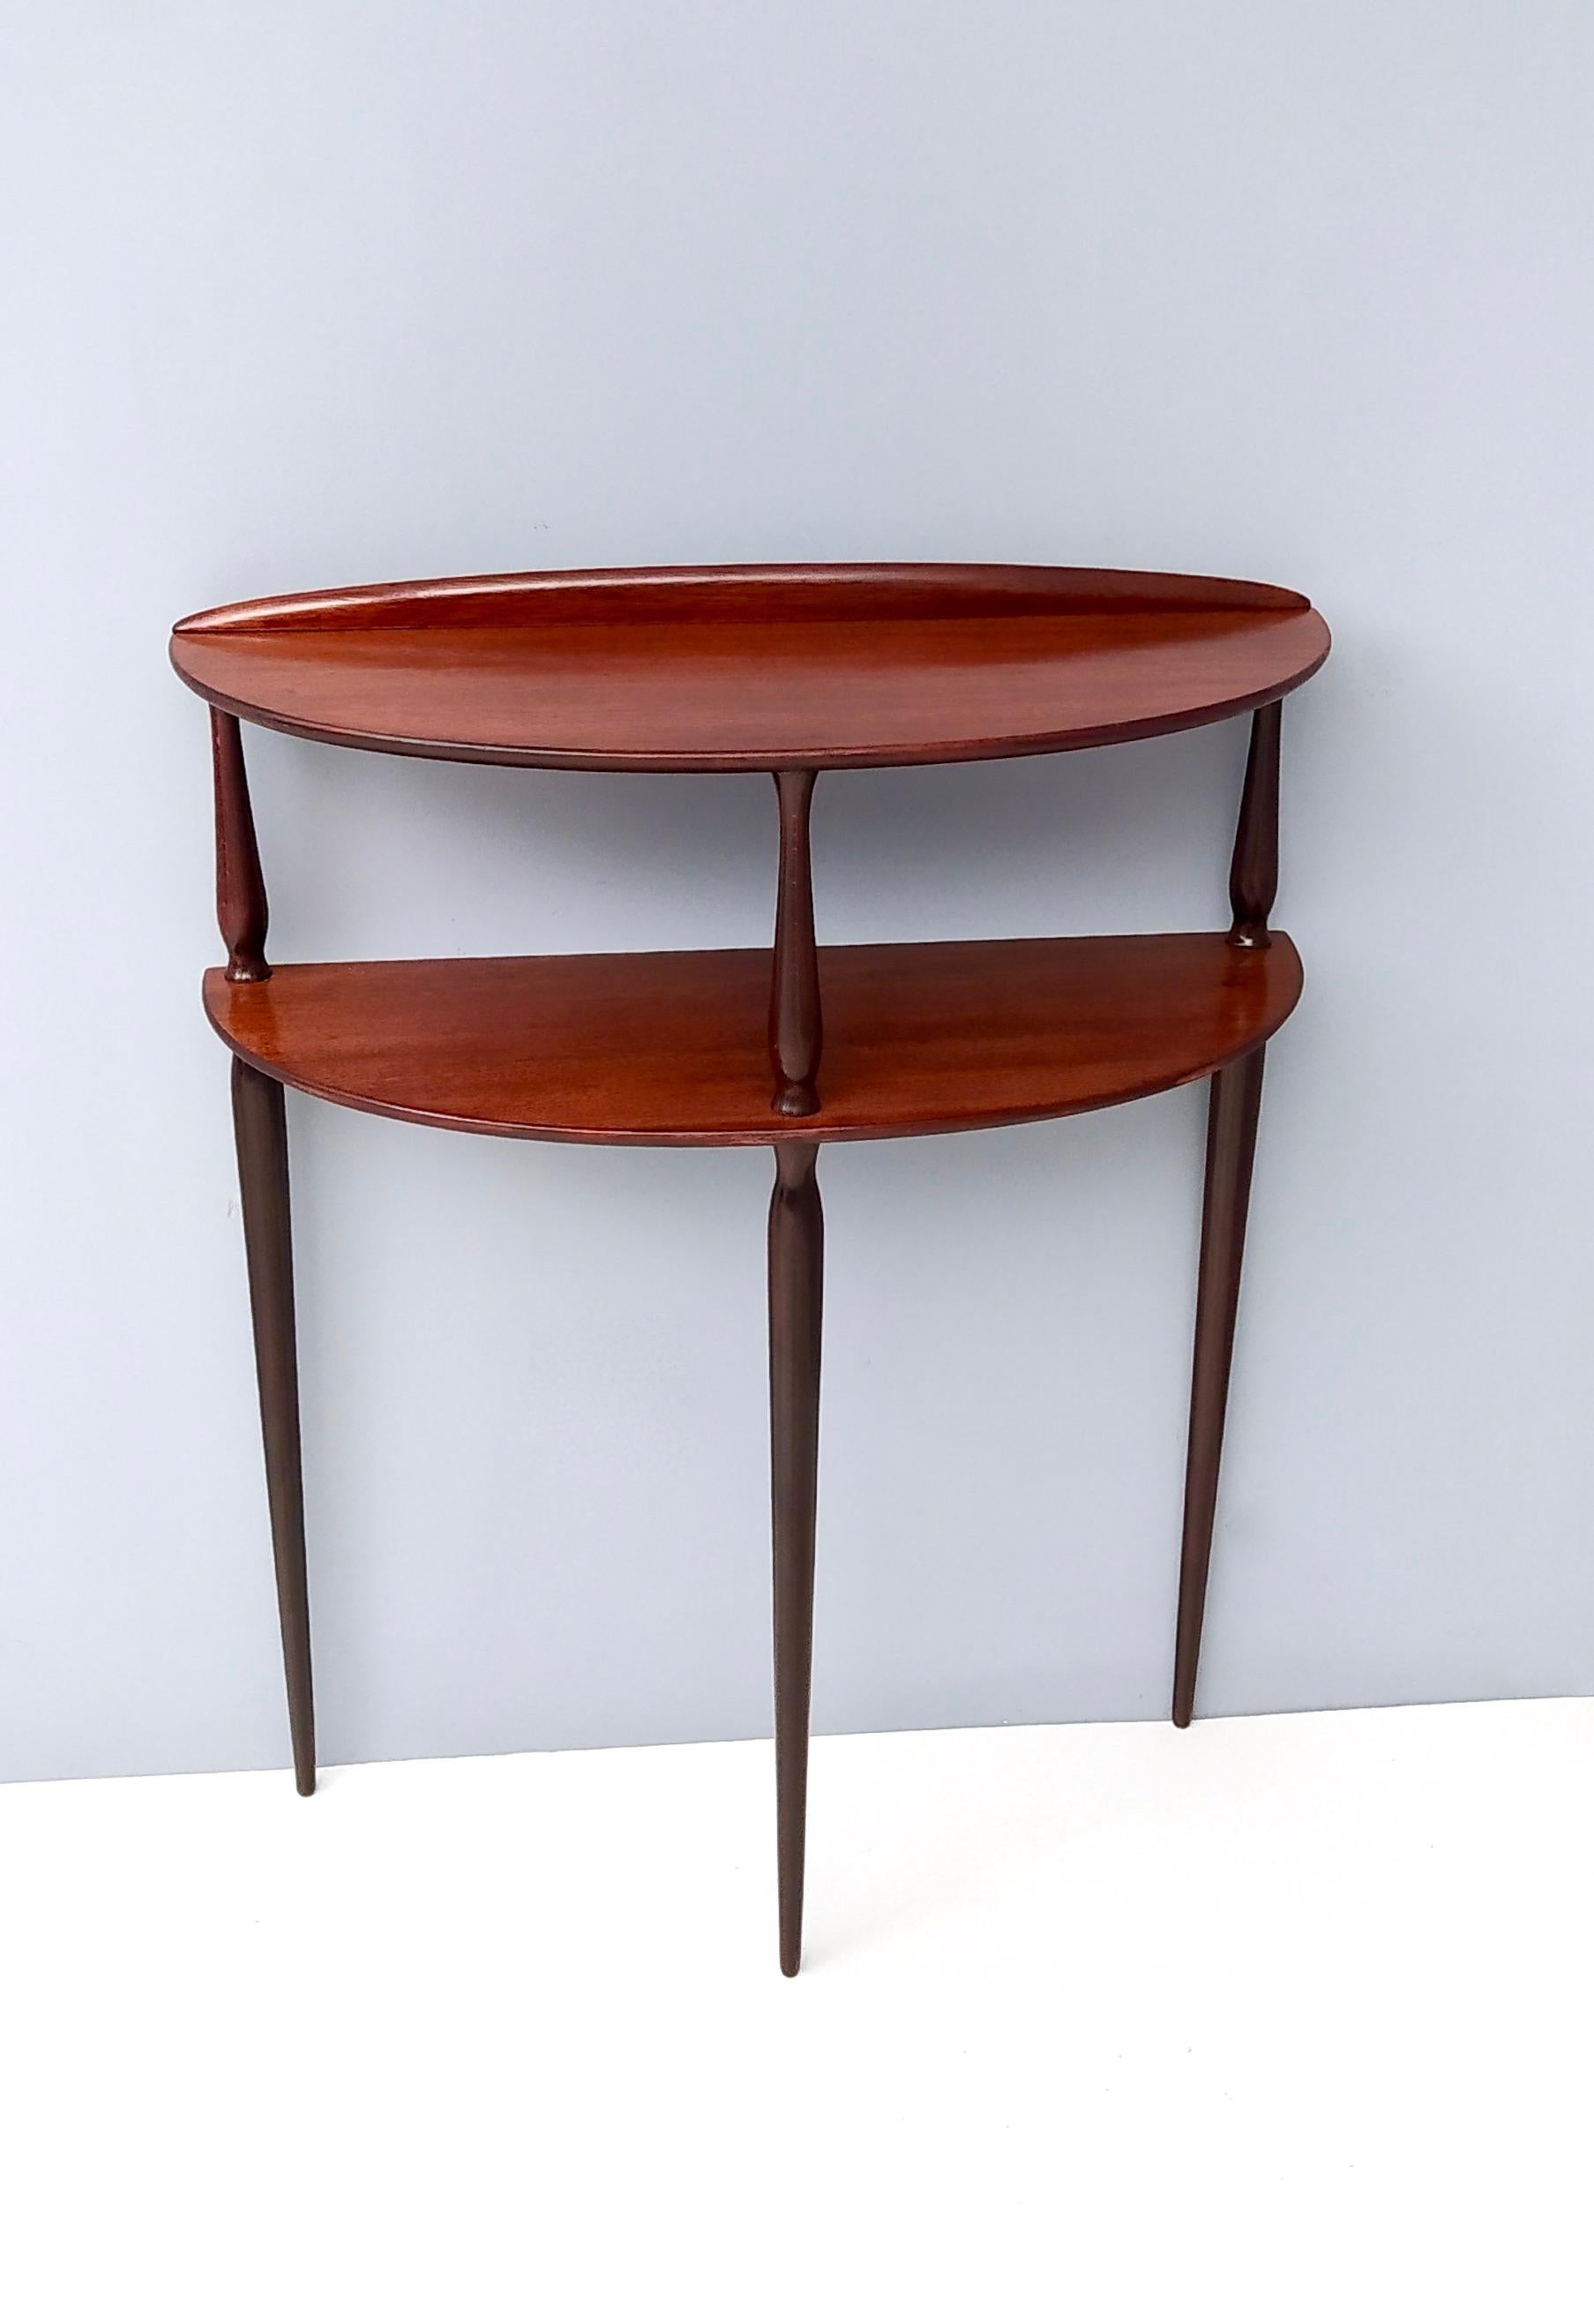 Turned Midcentury Minimalist Demilune Mahogany Console with Two Shelves, Italy, 1950s